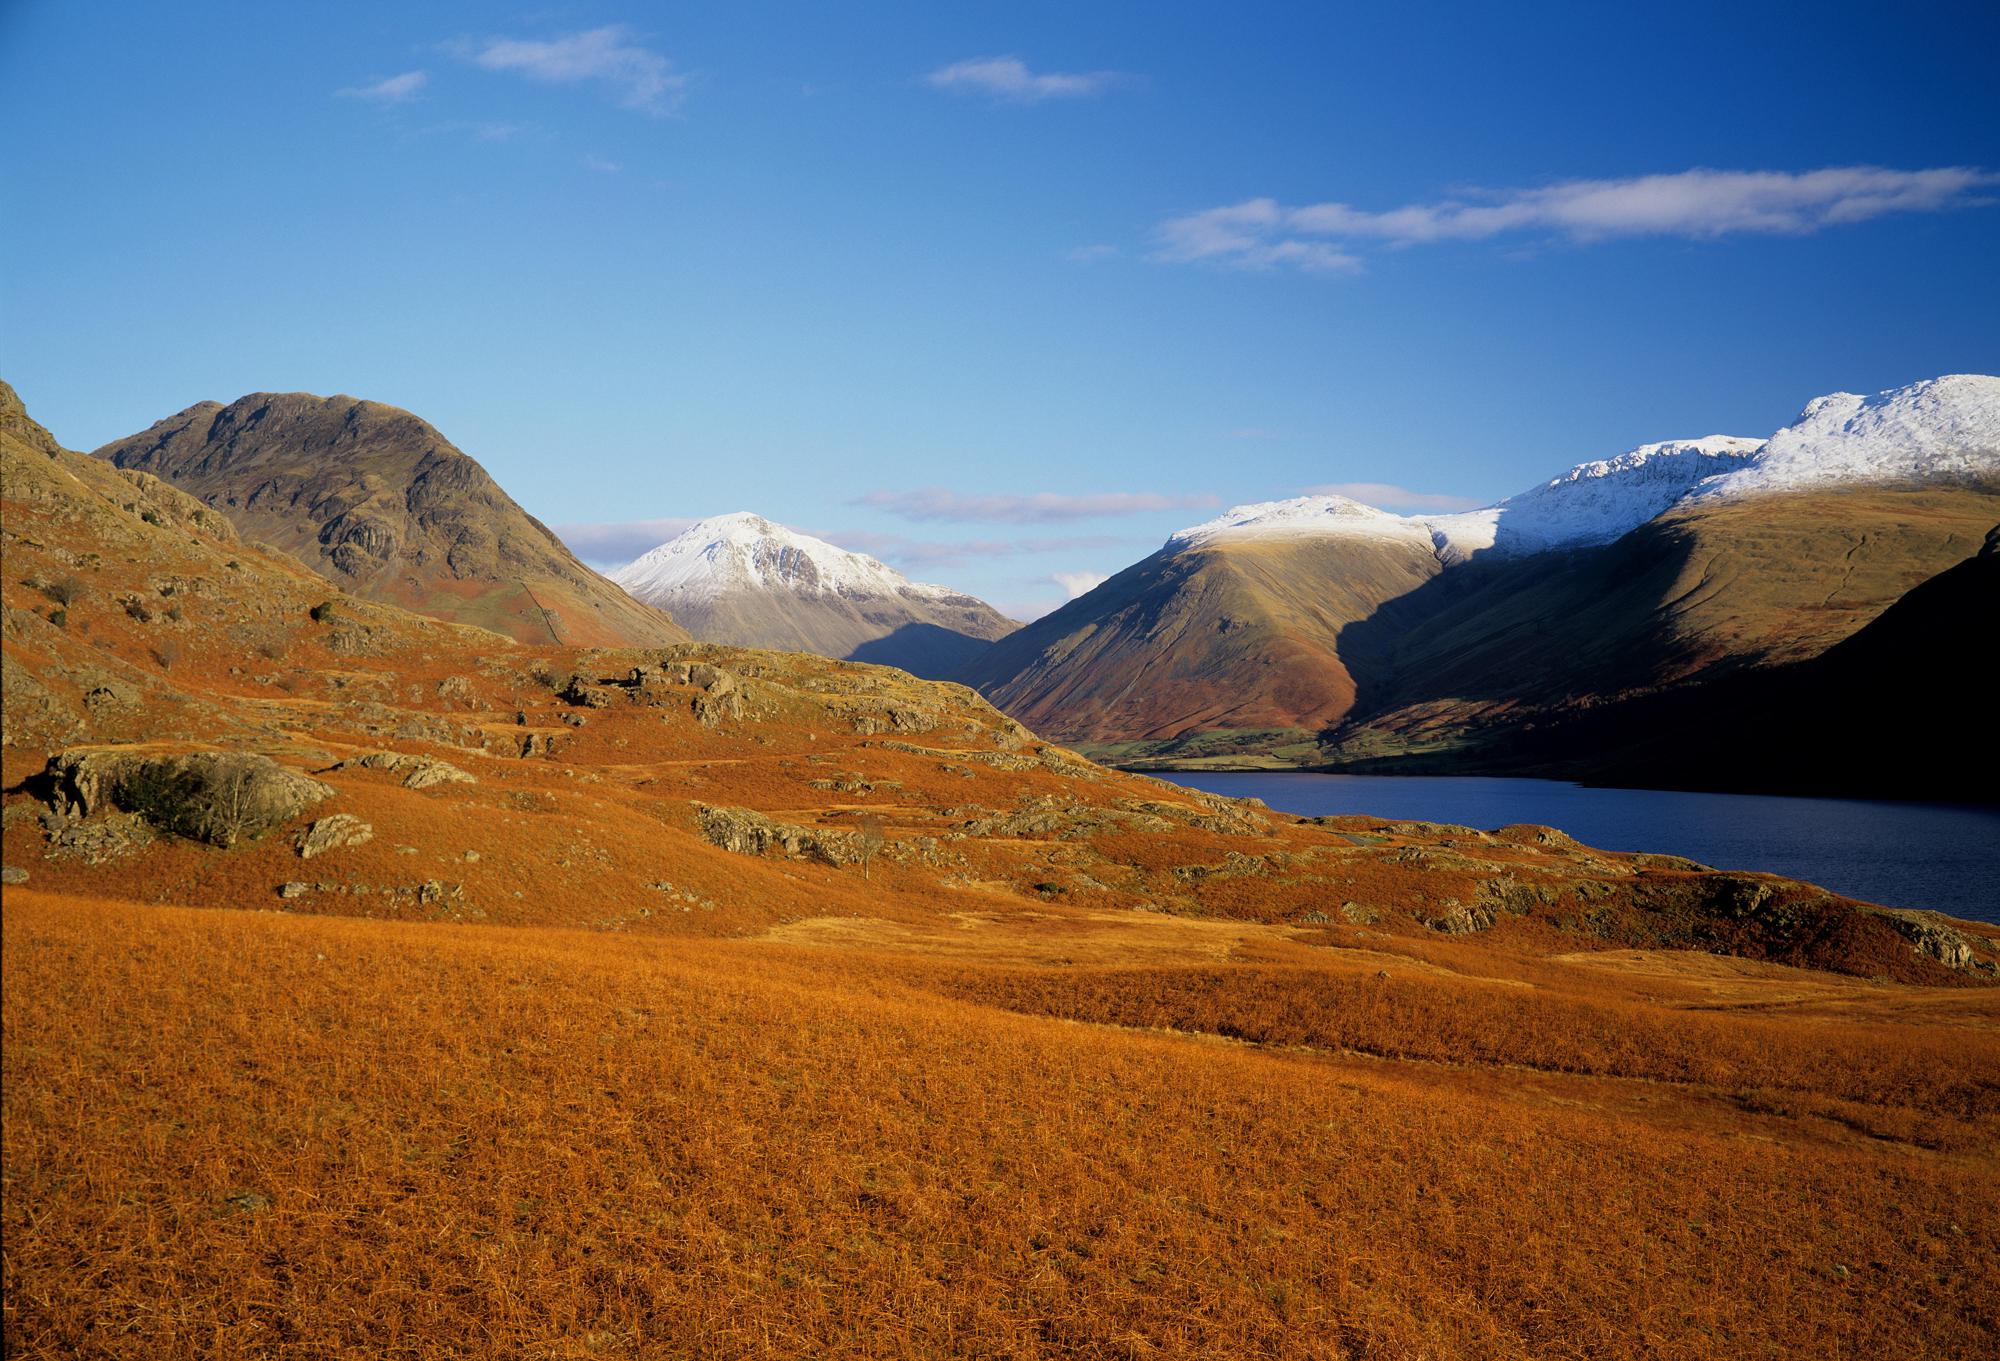 Scafell Pike Camping – Campsites near Scafell Pike, Lake District